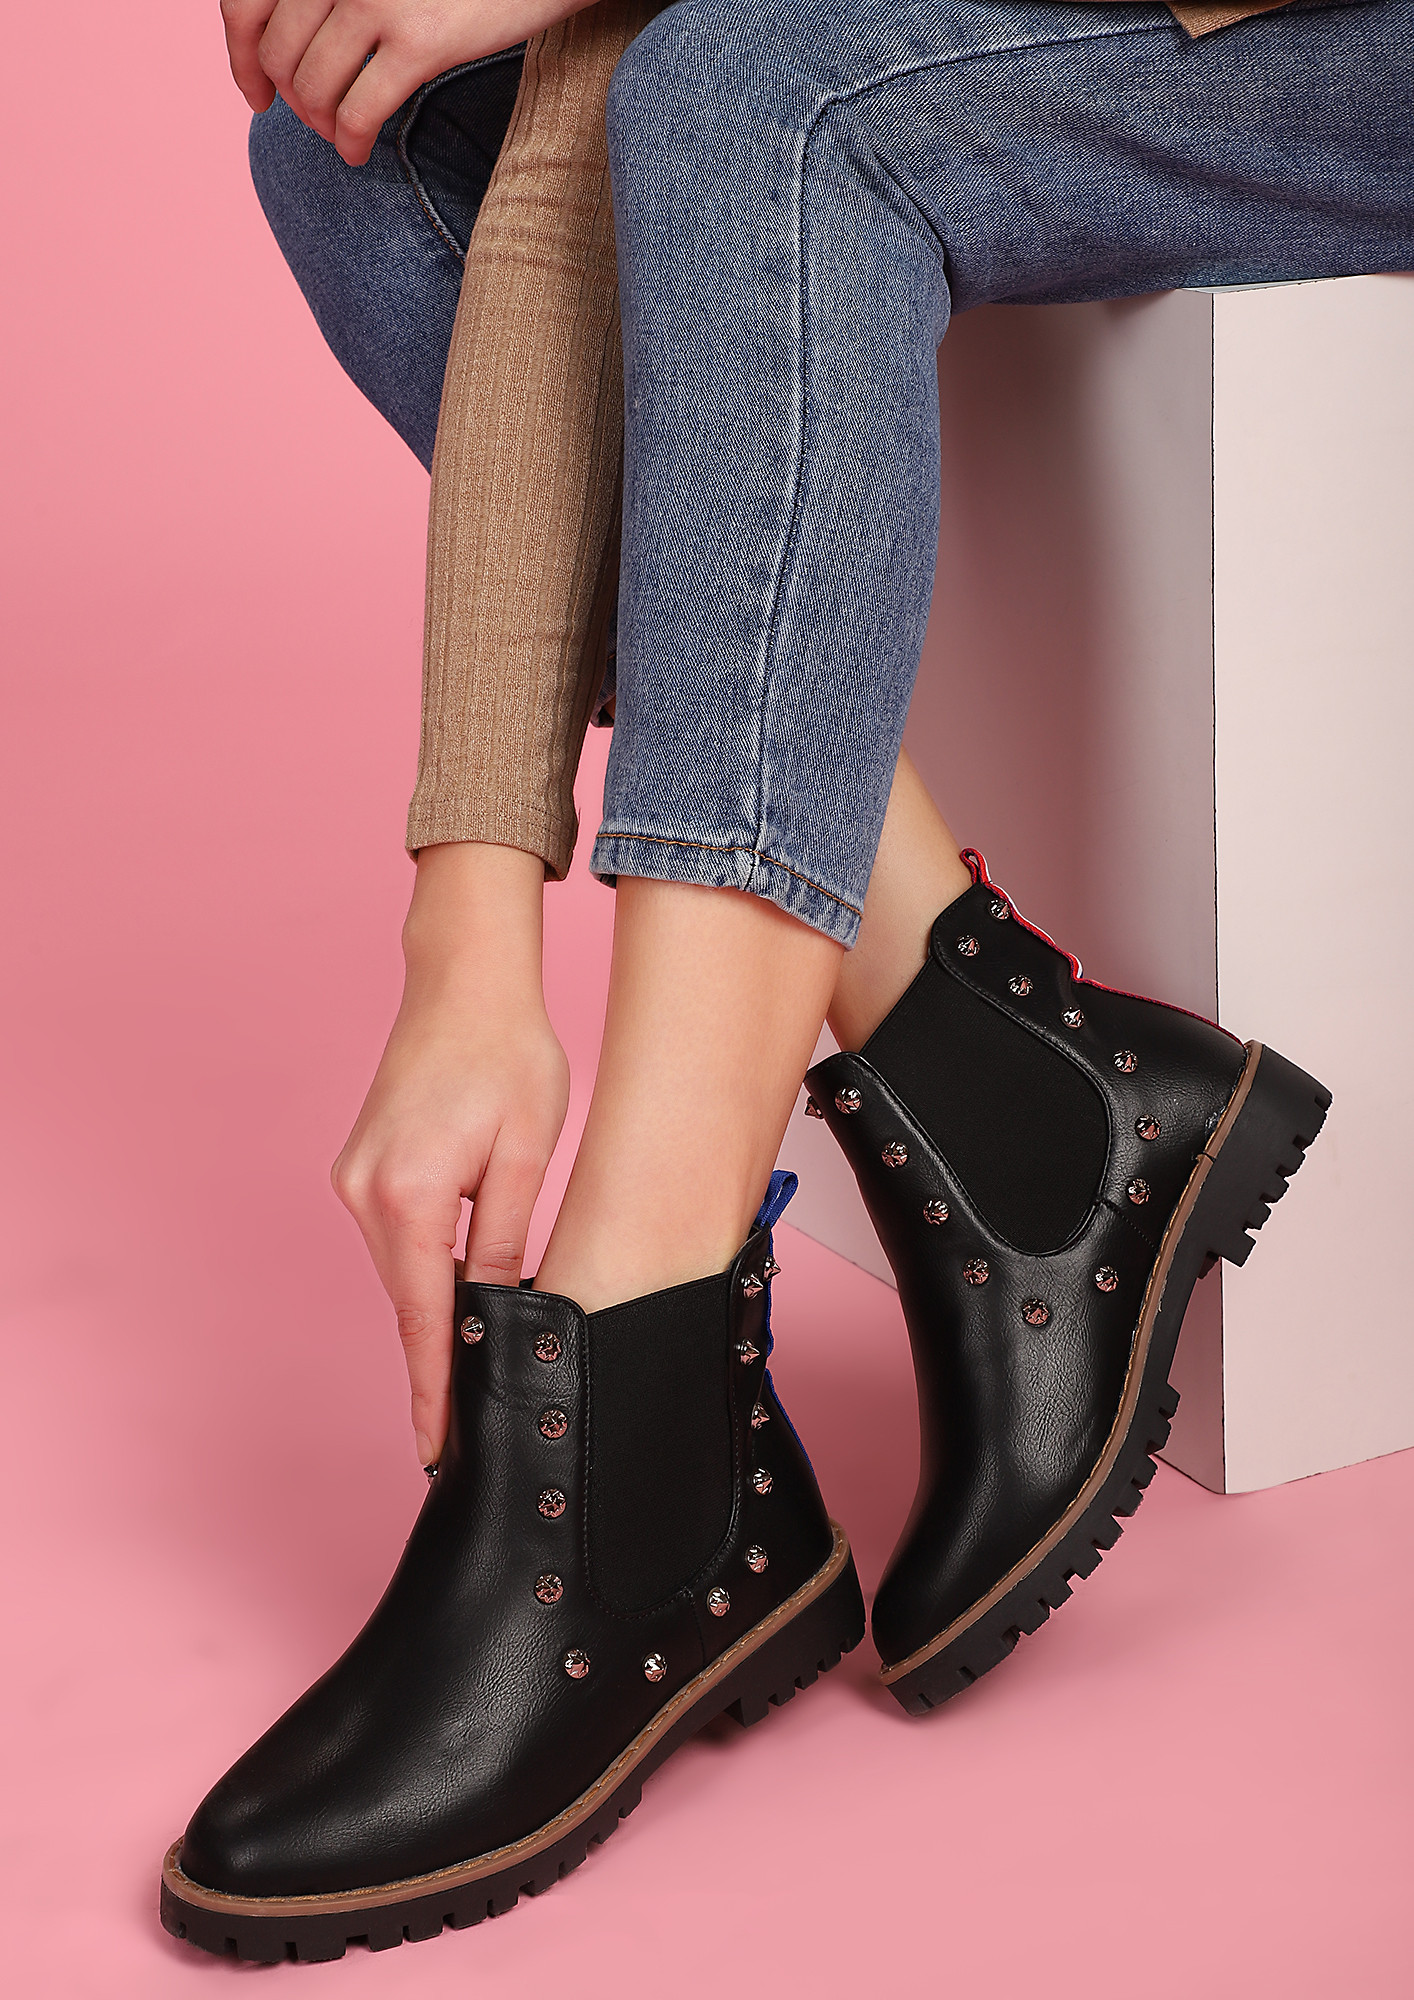 FALL IN PLAY BLACK SLIP-ON BOOTS